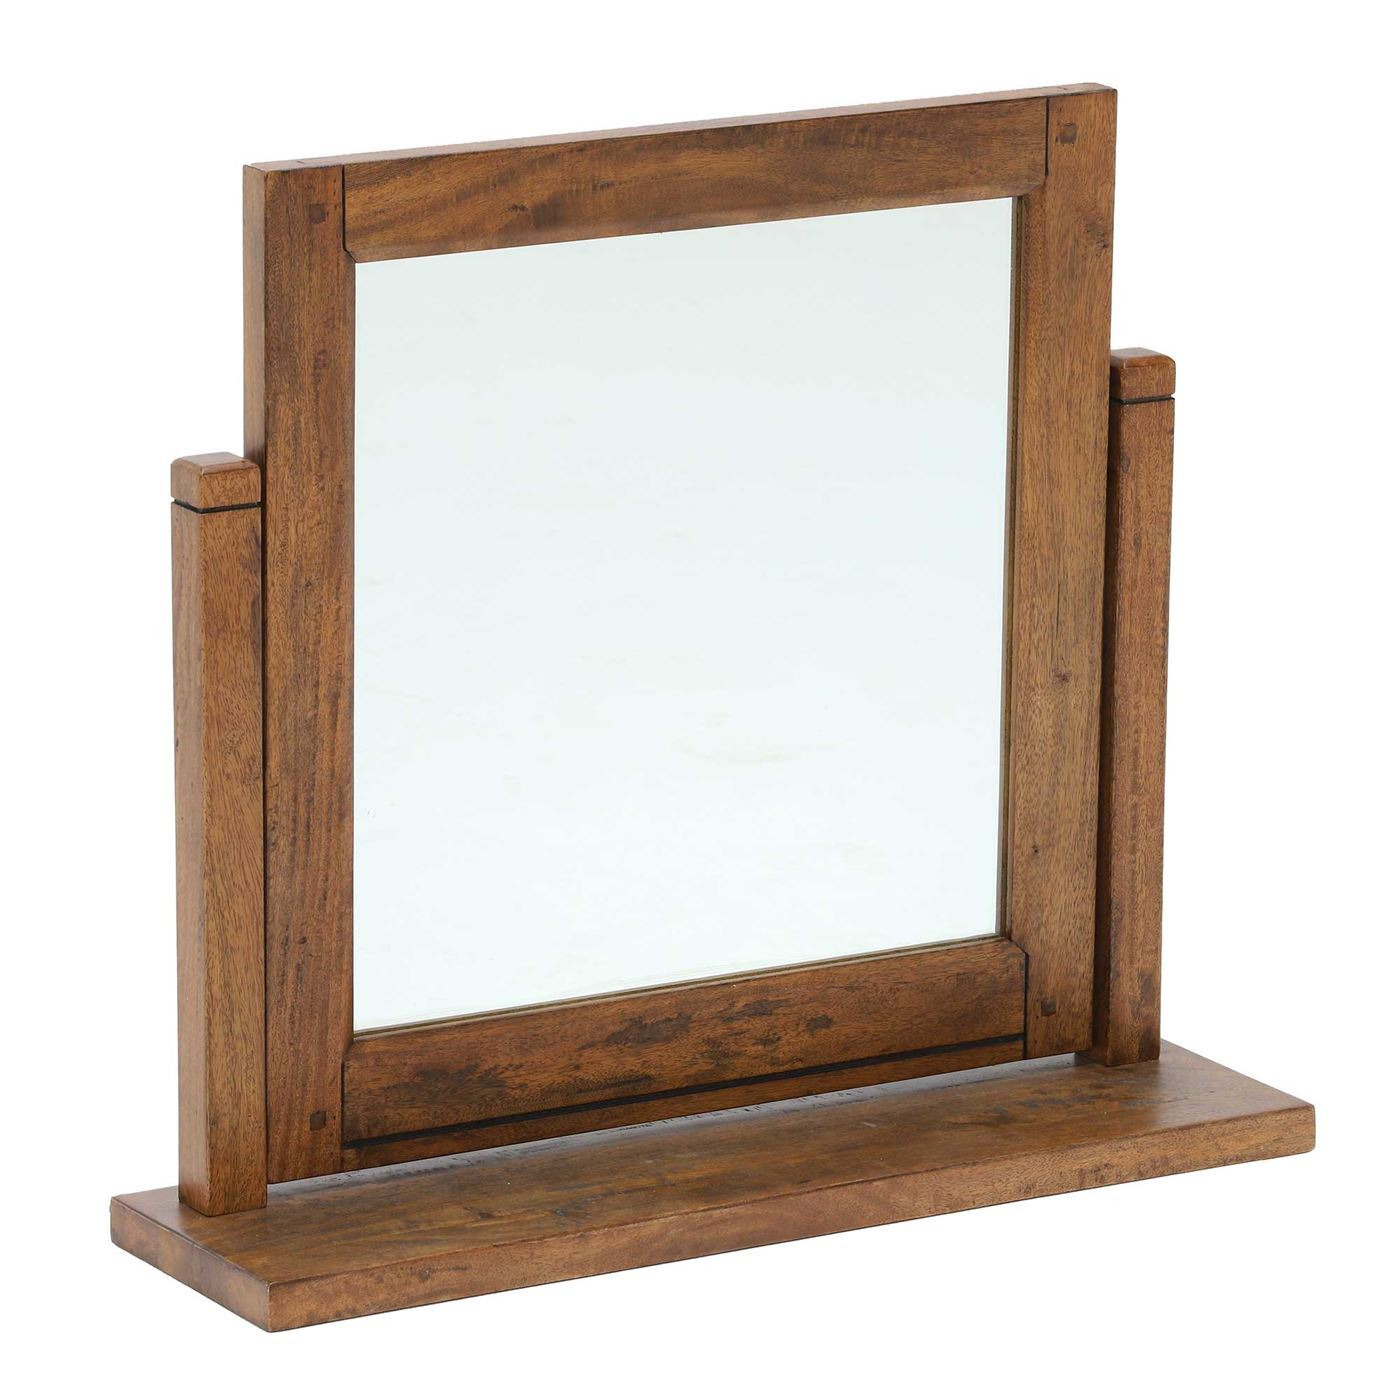 New Frontier Gallery Mirror, Square, Mango Wood - Barker & Stonehouse - image 1